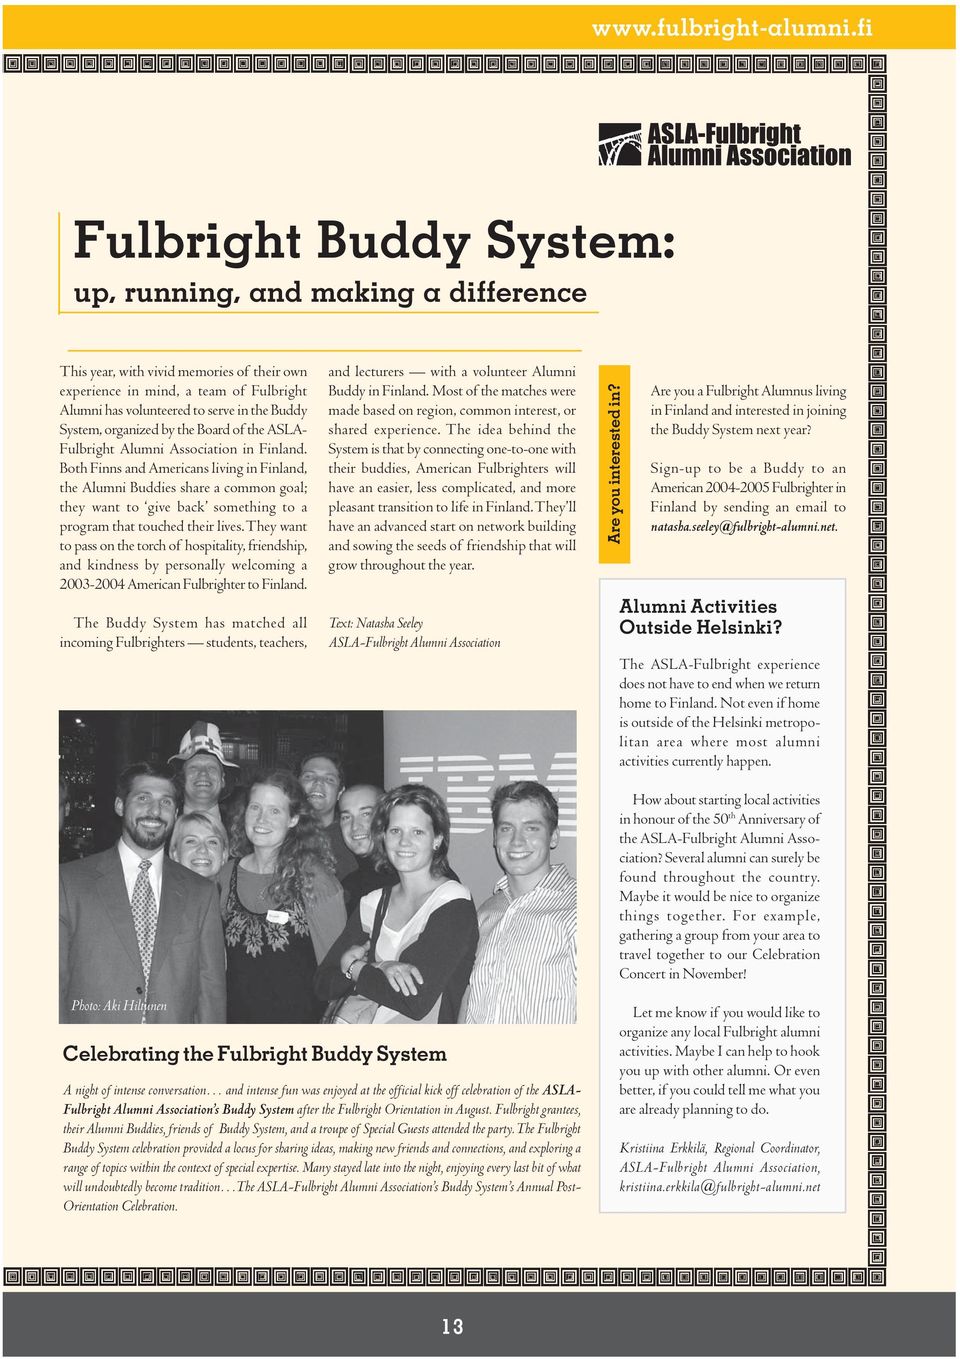 fi Fulbright Buddy System: up, running, and making a difference This year, with vivid memories of their own experience in mind, a team of Fulbright Alumni has volunteered to serve in the Buddy